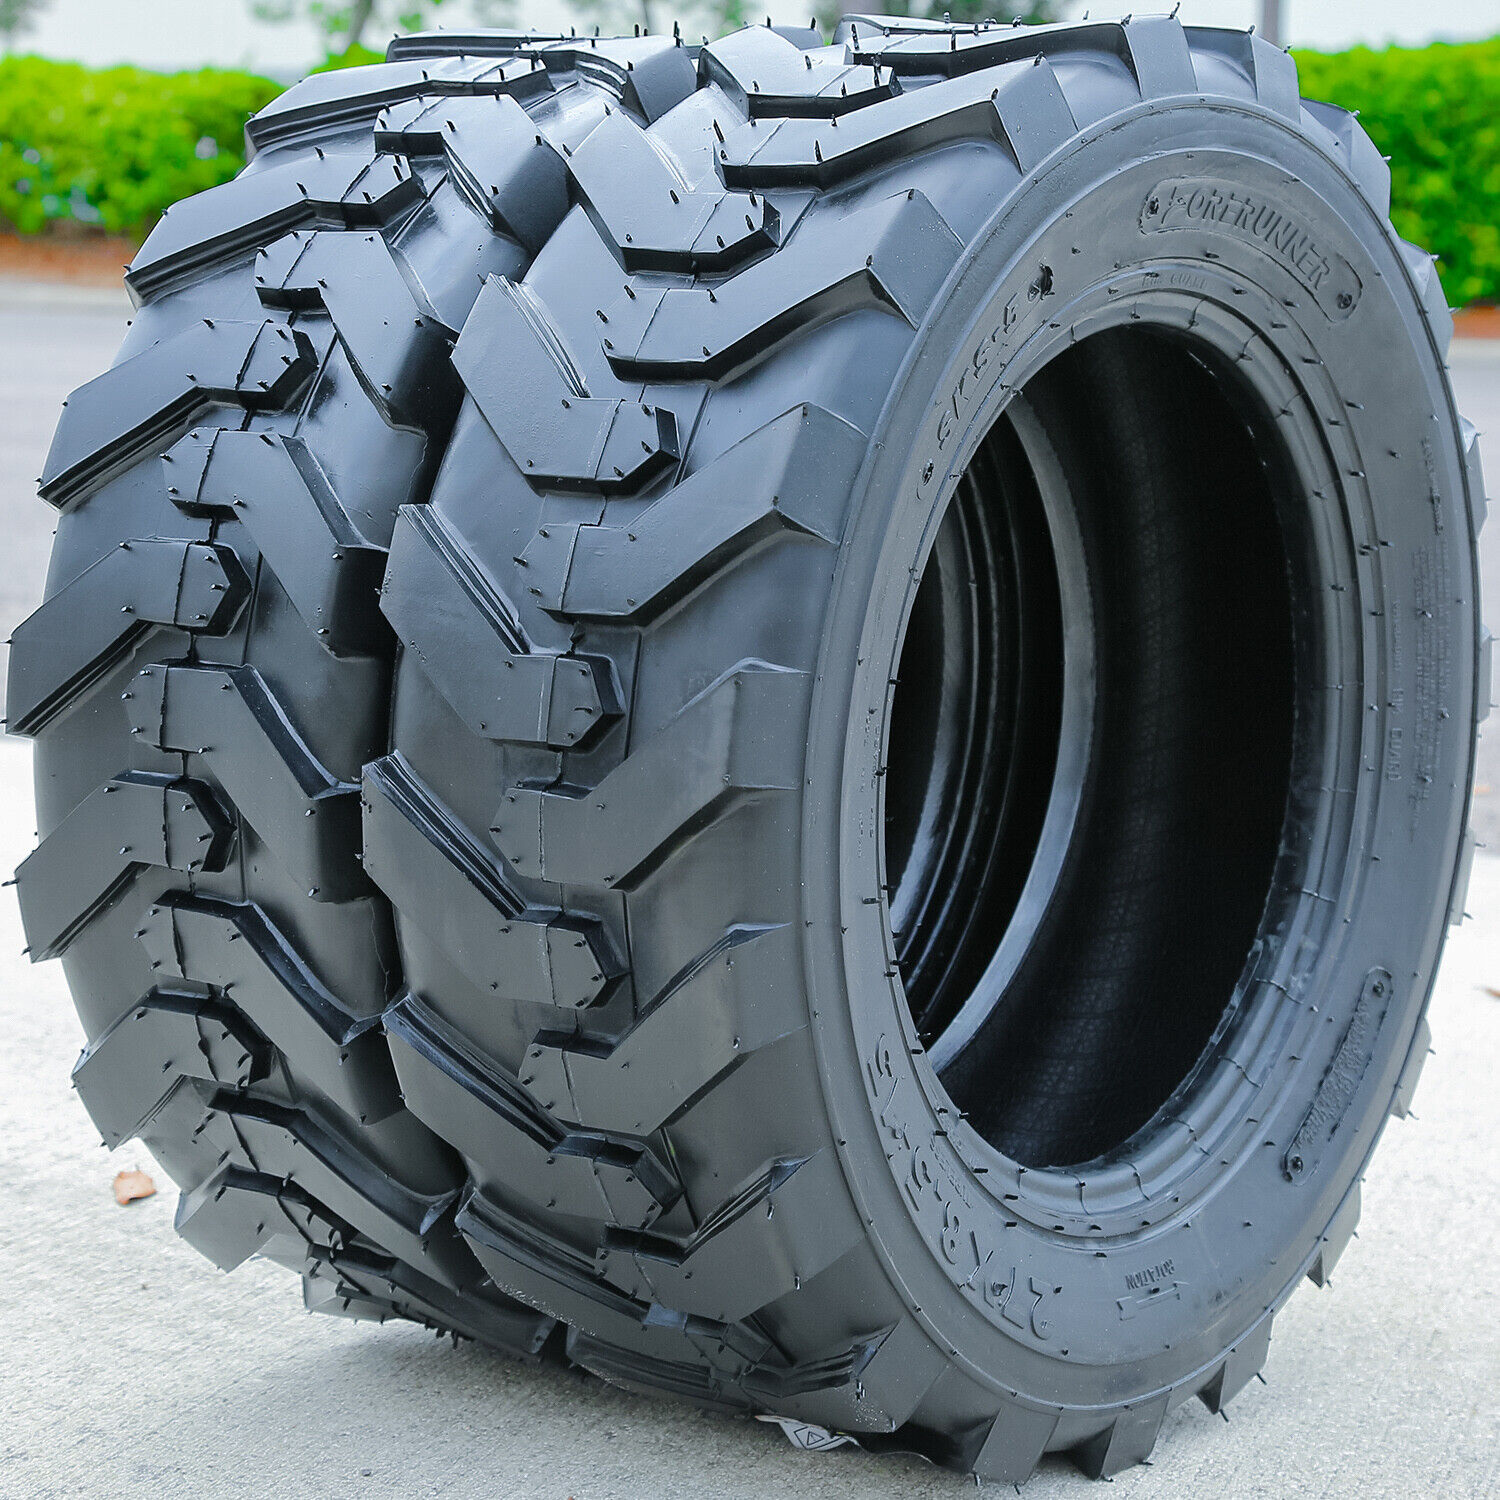 2 Tires Forerunner SKS-5 27X8.50-15 Load 6 Ply Industrial